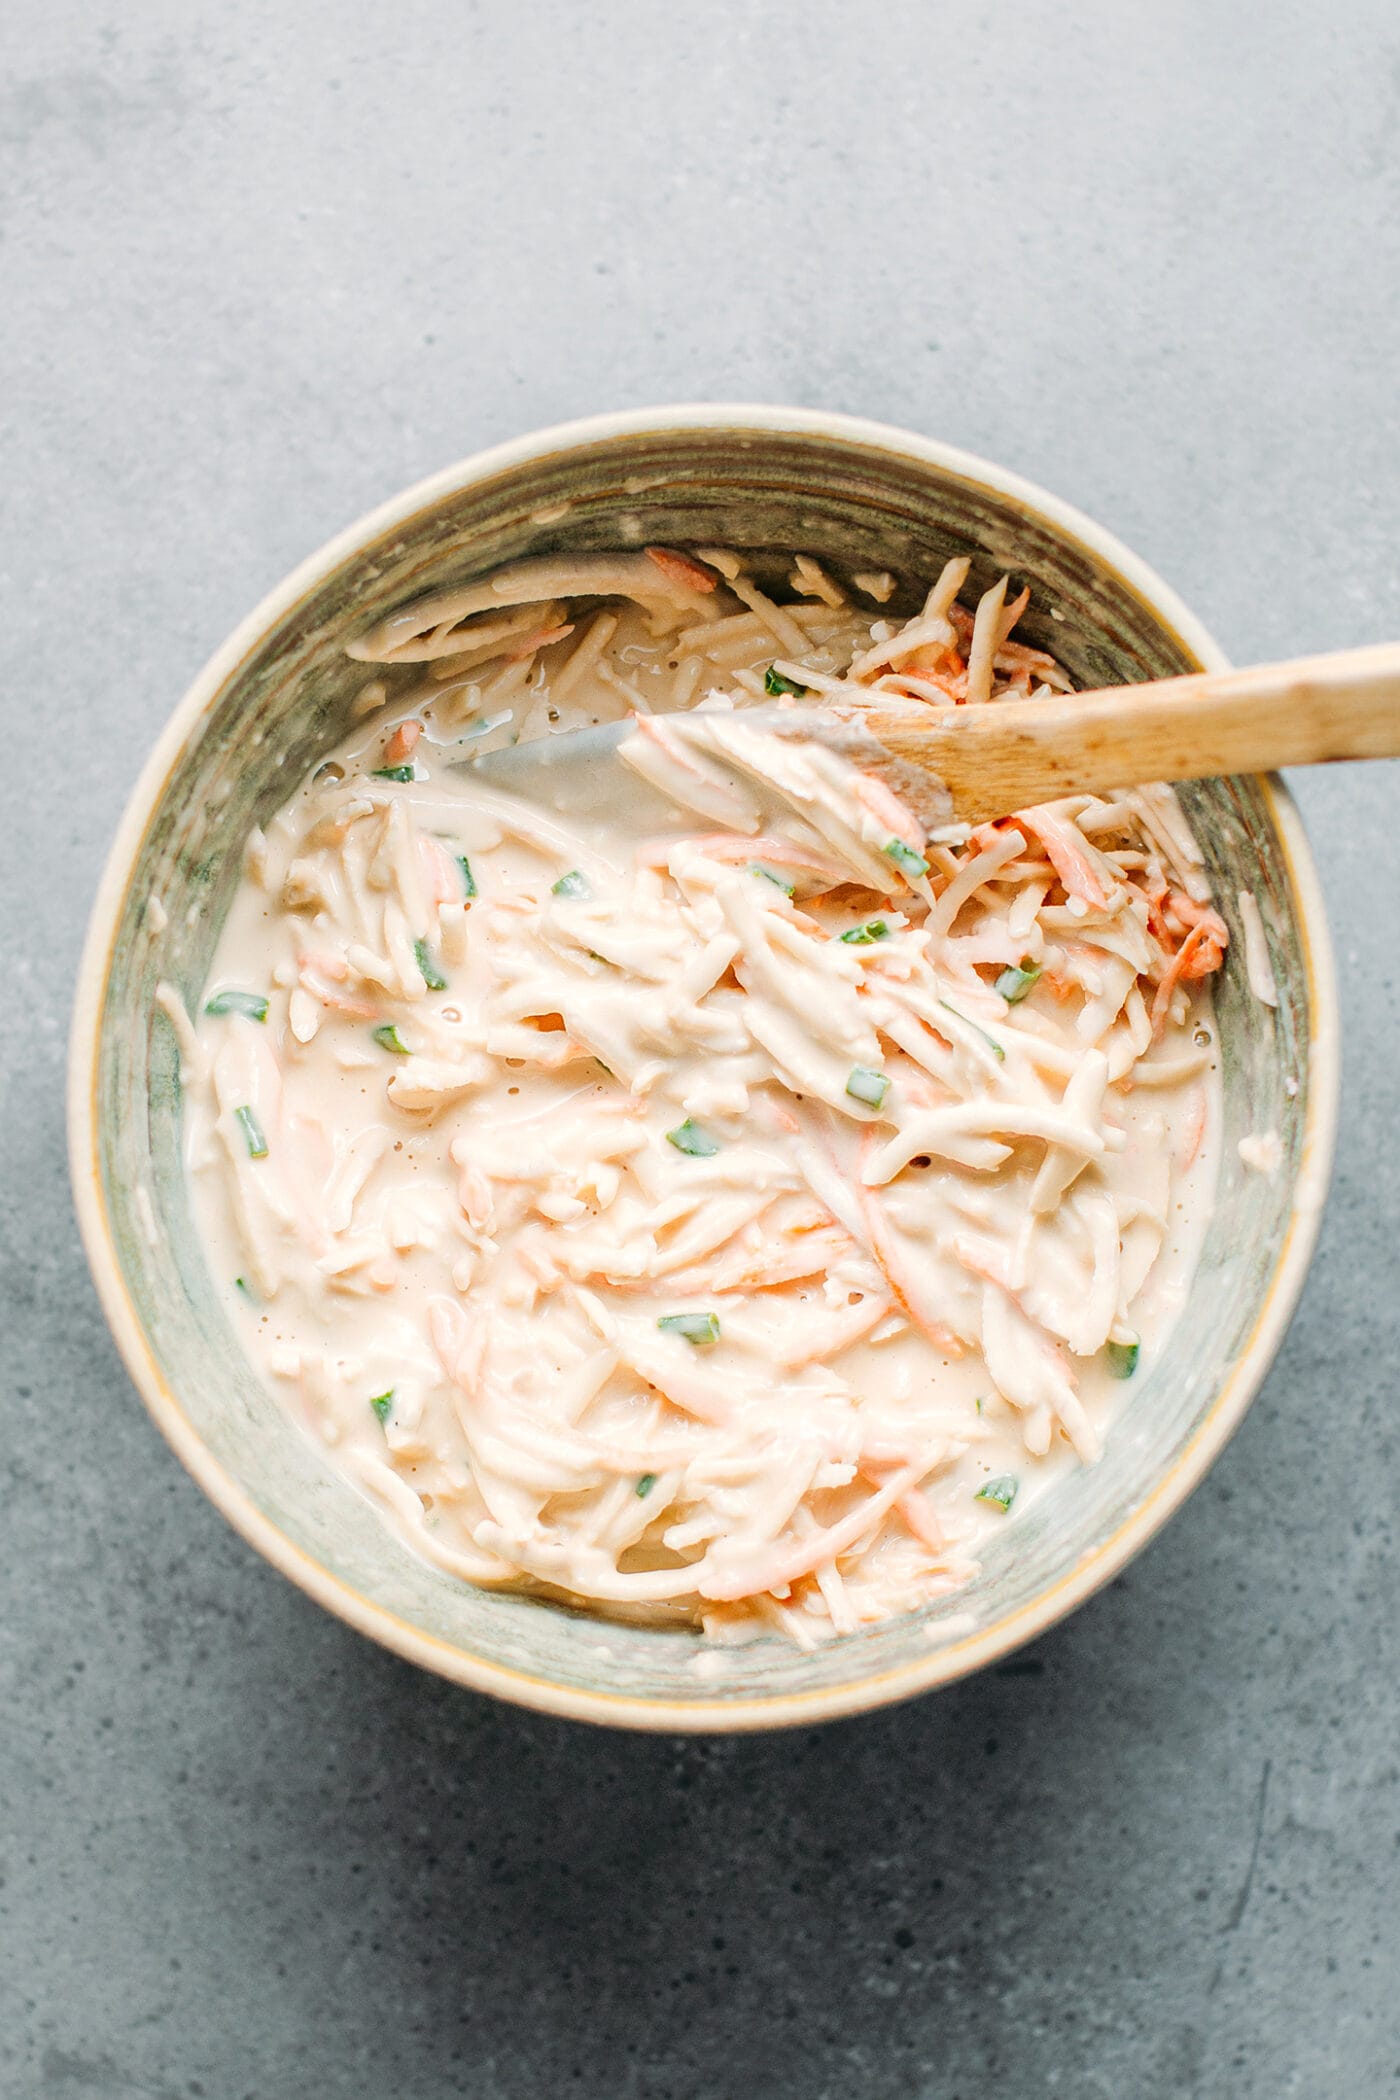 Fritter batter with shredded taro and carrots.